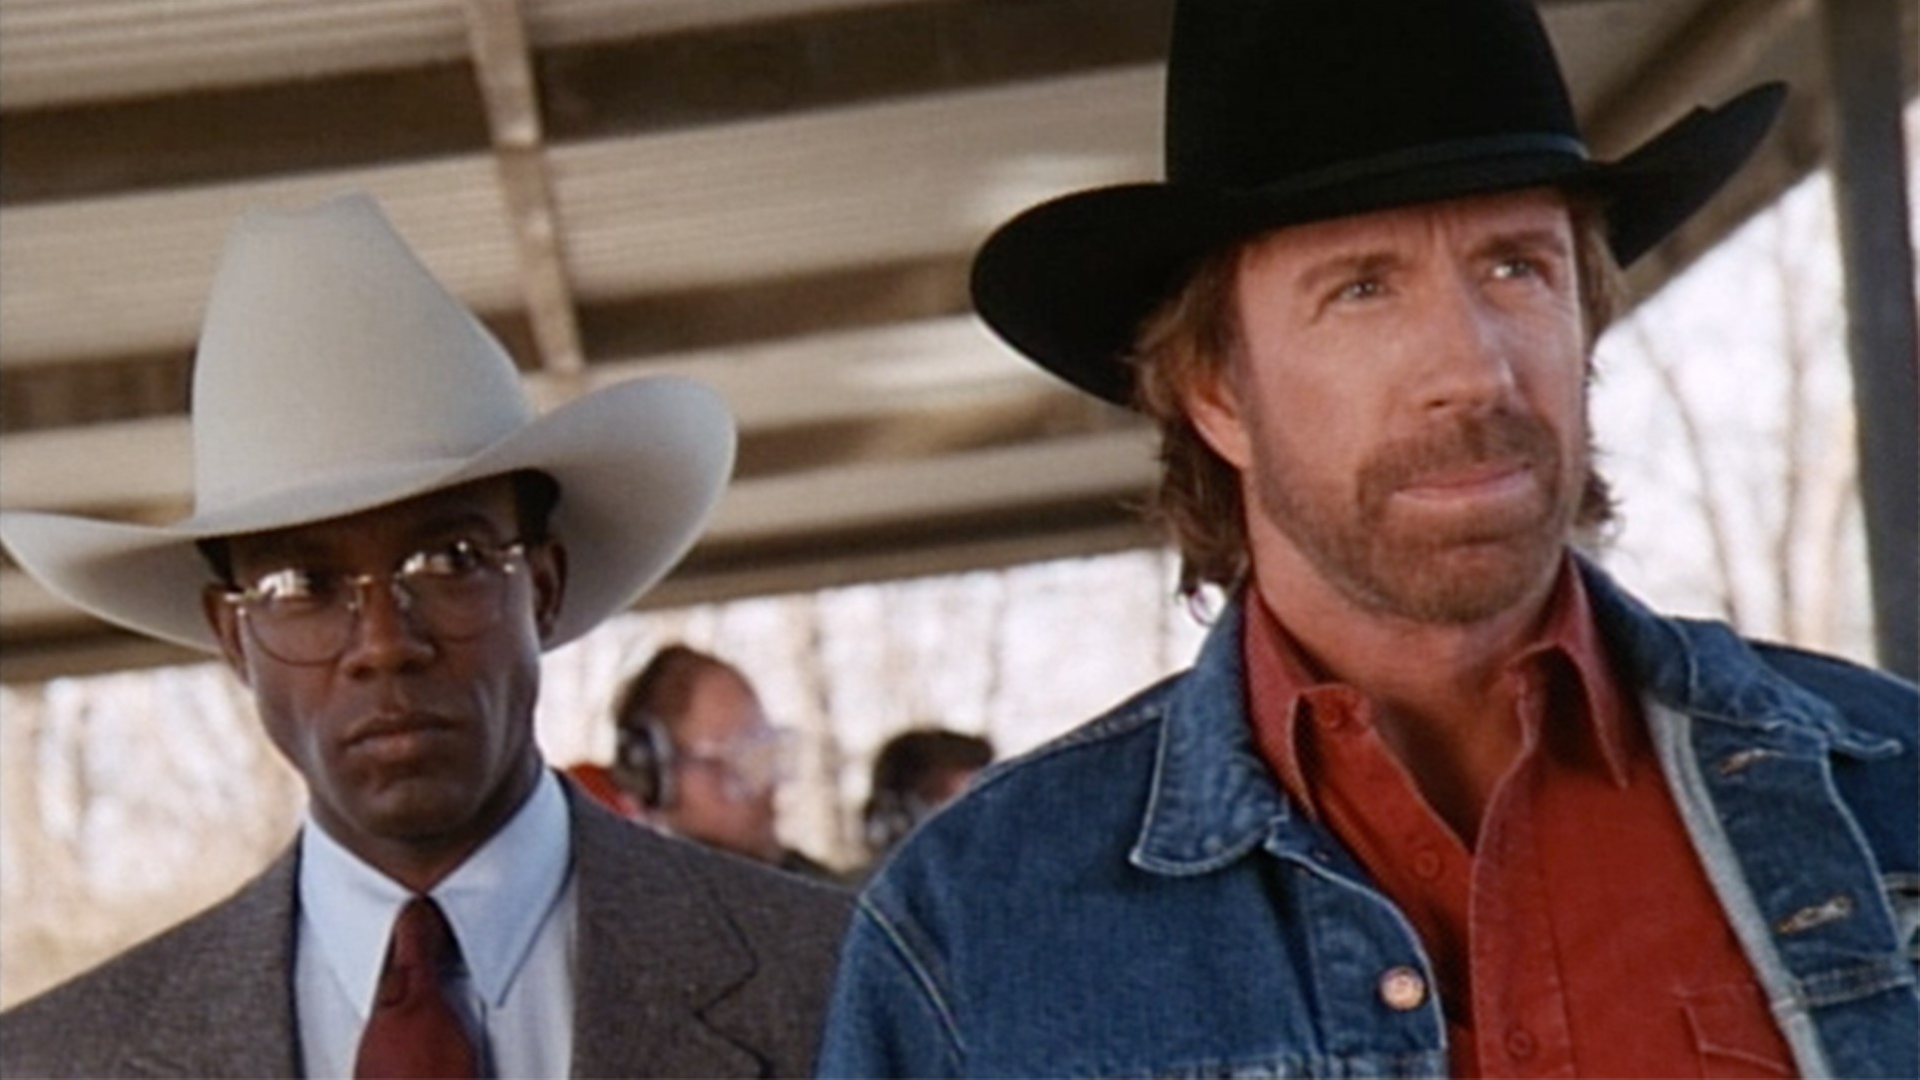 <p>Matlock's Conrad McMasters was a character known for his rodeo skills. And that came in handy for his next role! In 1993, Clarence Gilyard made the move to yet another very popular series: 'Walker, Texas Ranger.'</p> <p>Image: CBS</p>